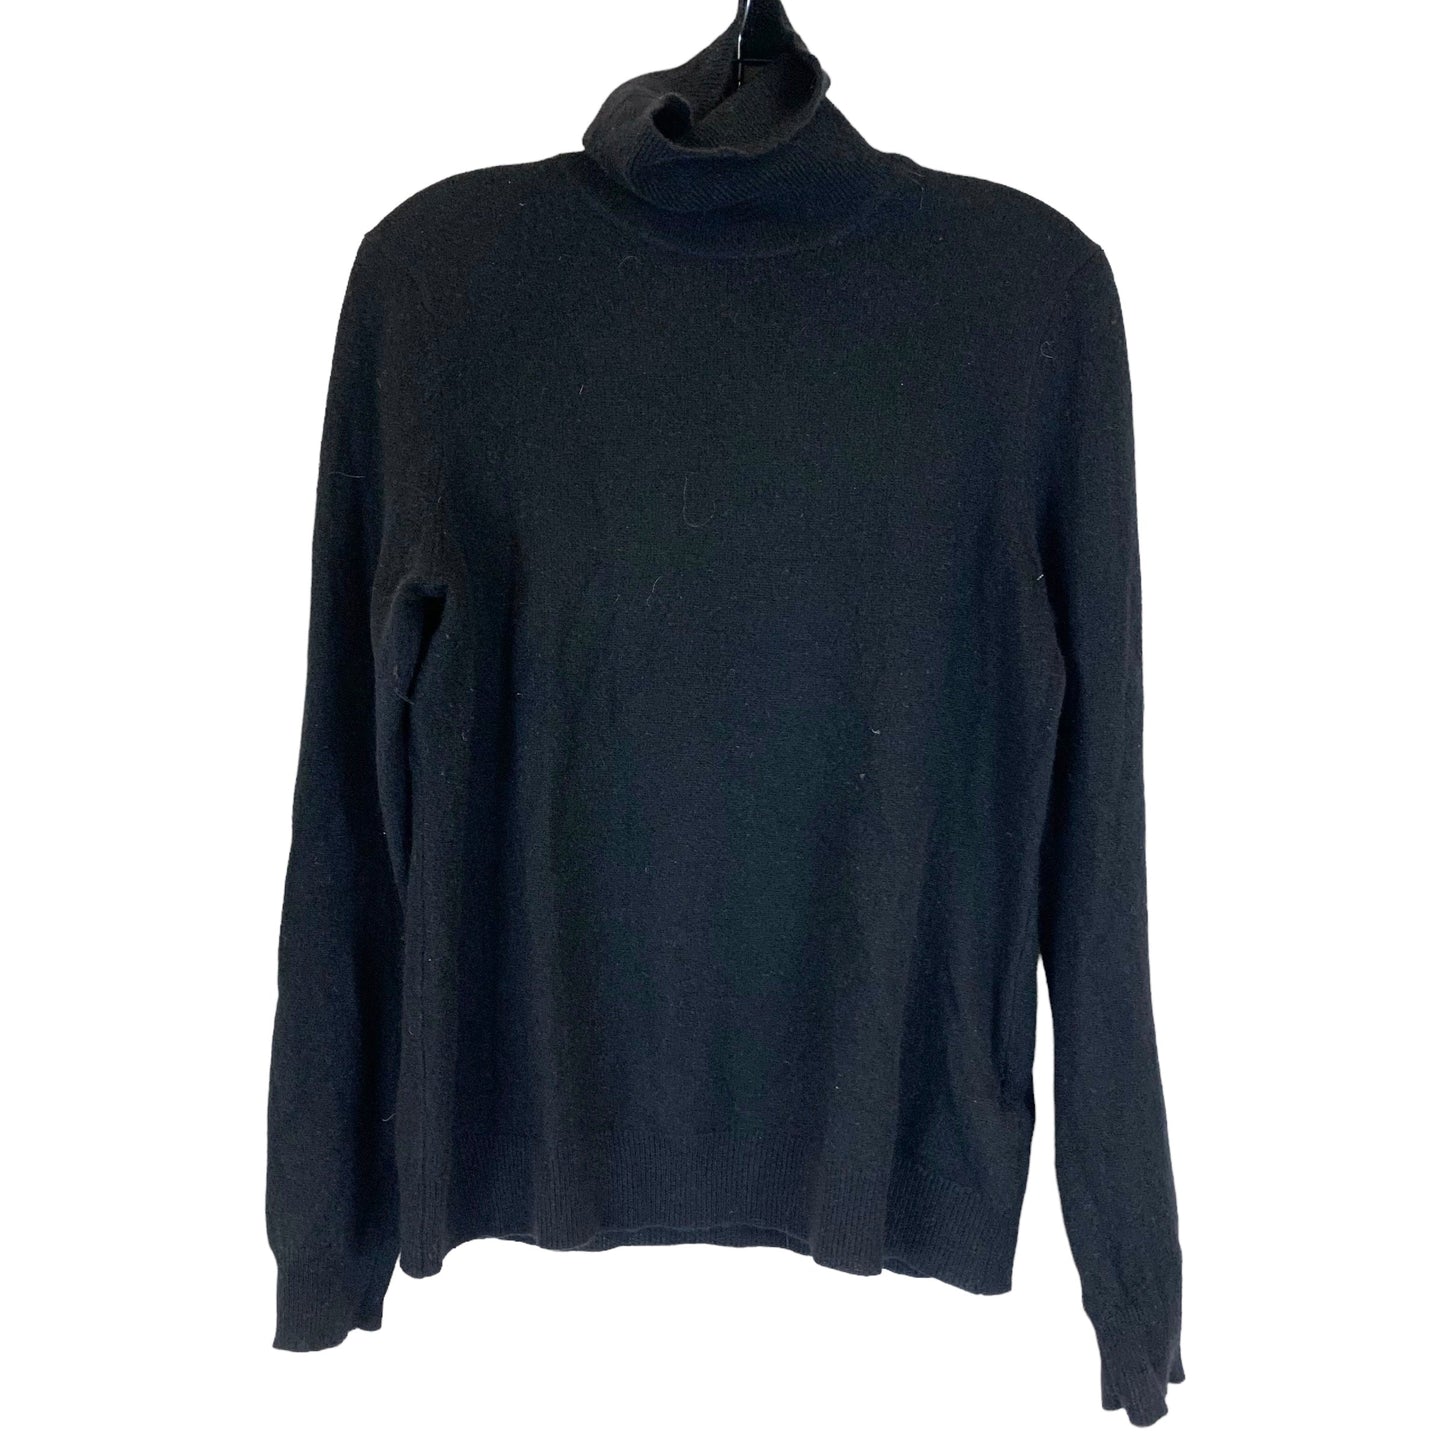 Black Sweater Cashmere Lord And Taylor, Size L